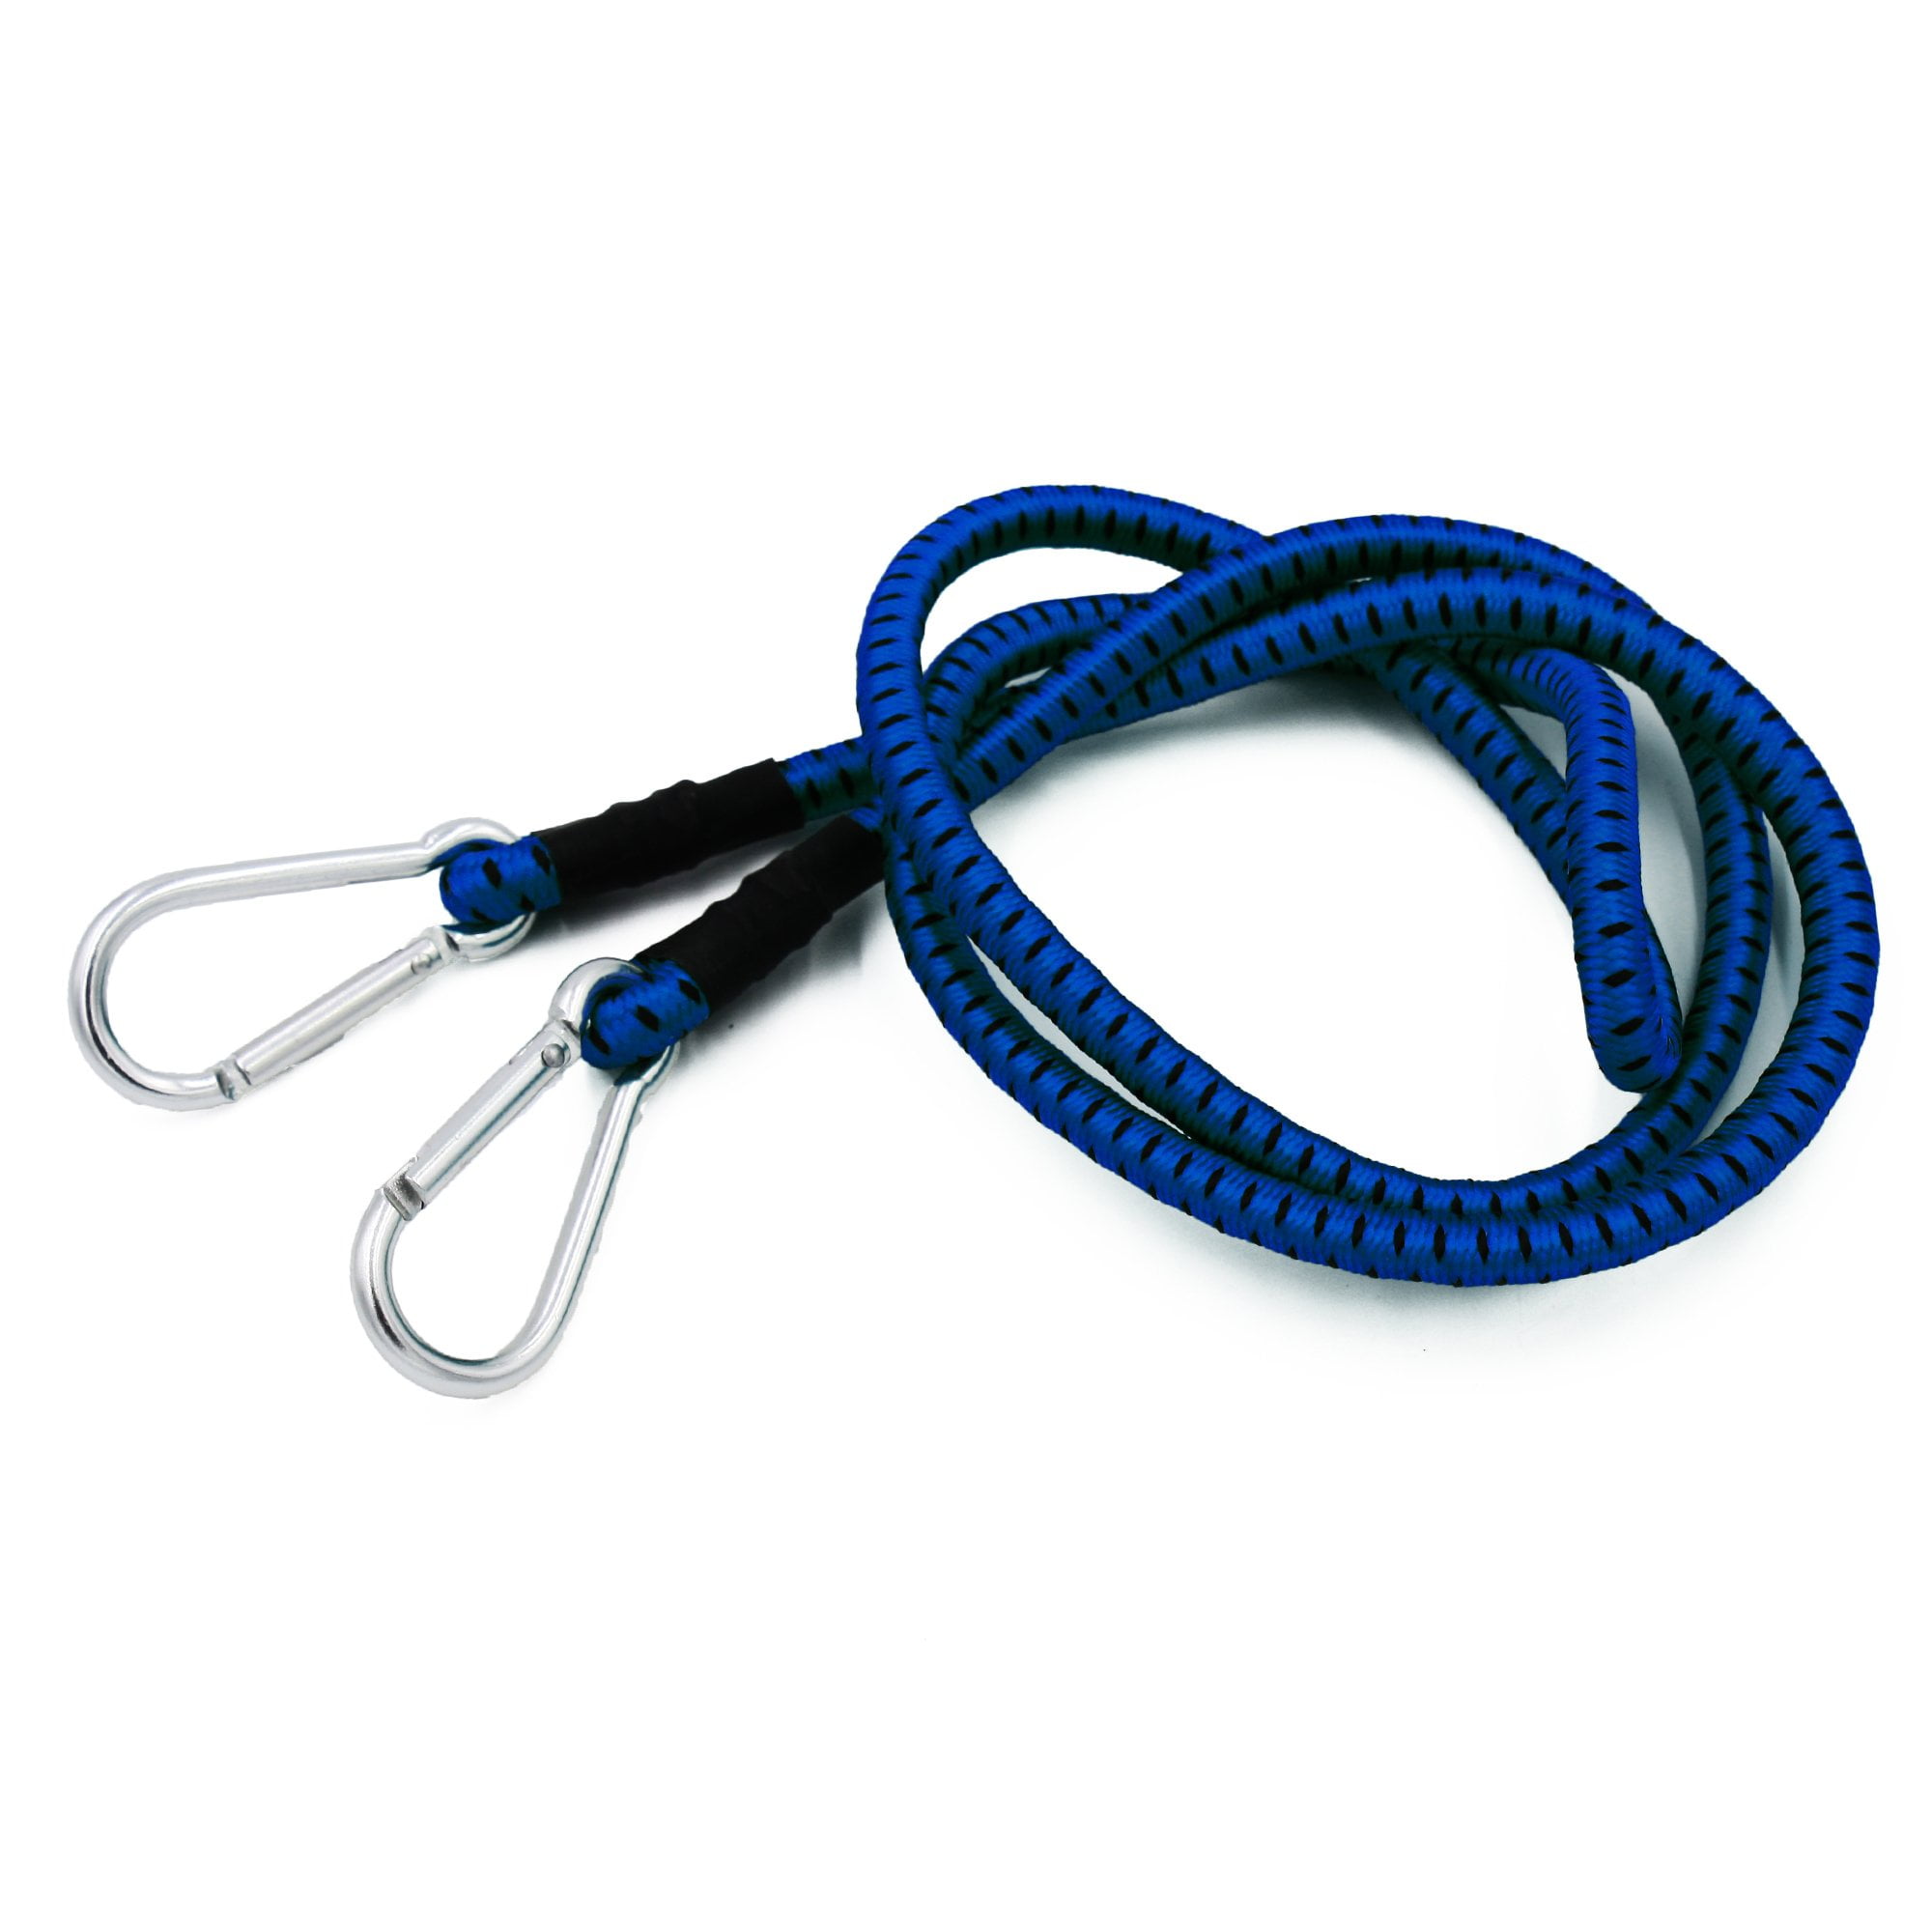 Details about   Nite Ize KnotBone Adjustable Bungee Cord Small 5mm 6"-28" w/ Carabiner Clip 